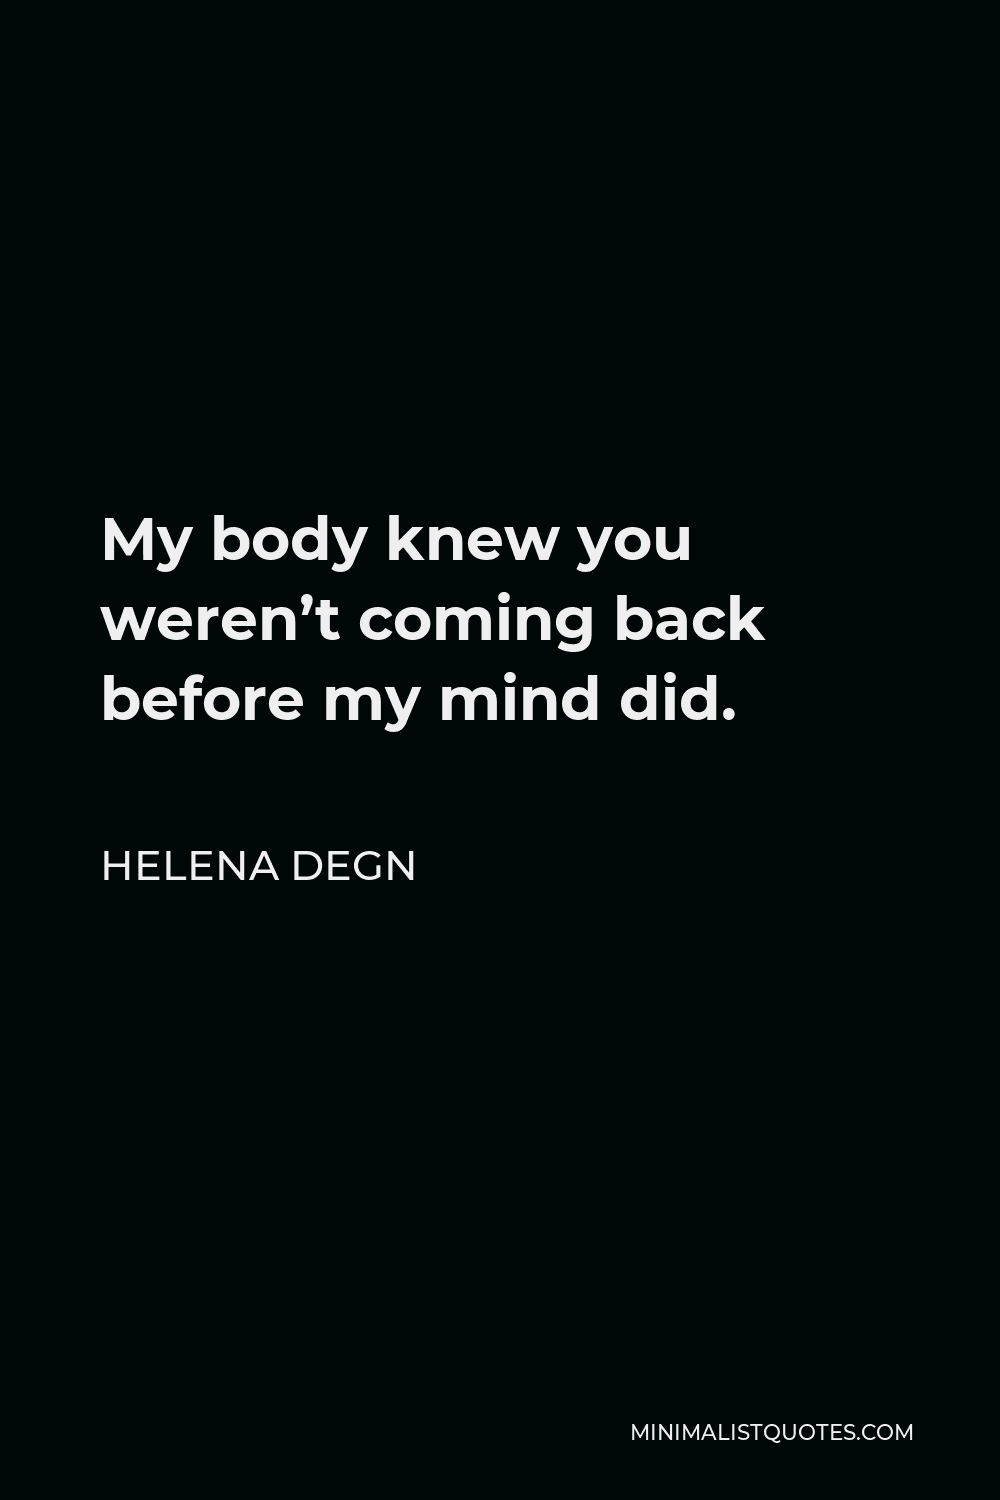 Helena Degn Quote - My body knew you weren’t coming back before my mind did.